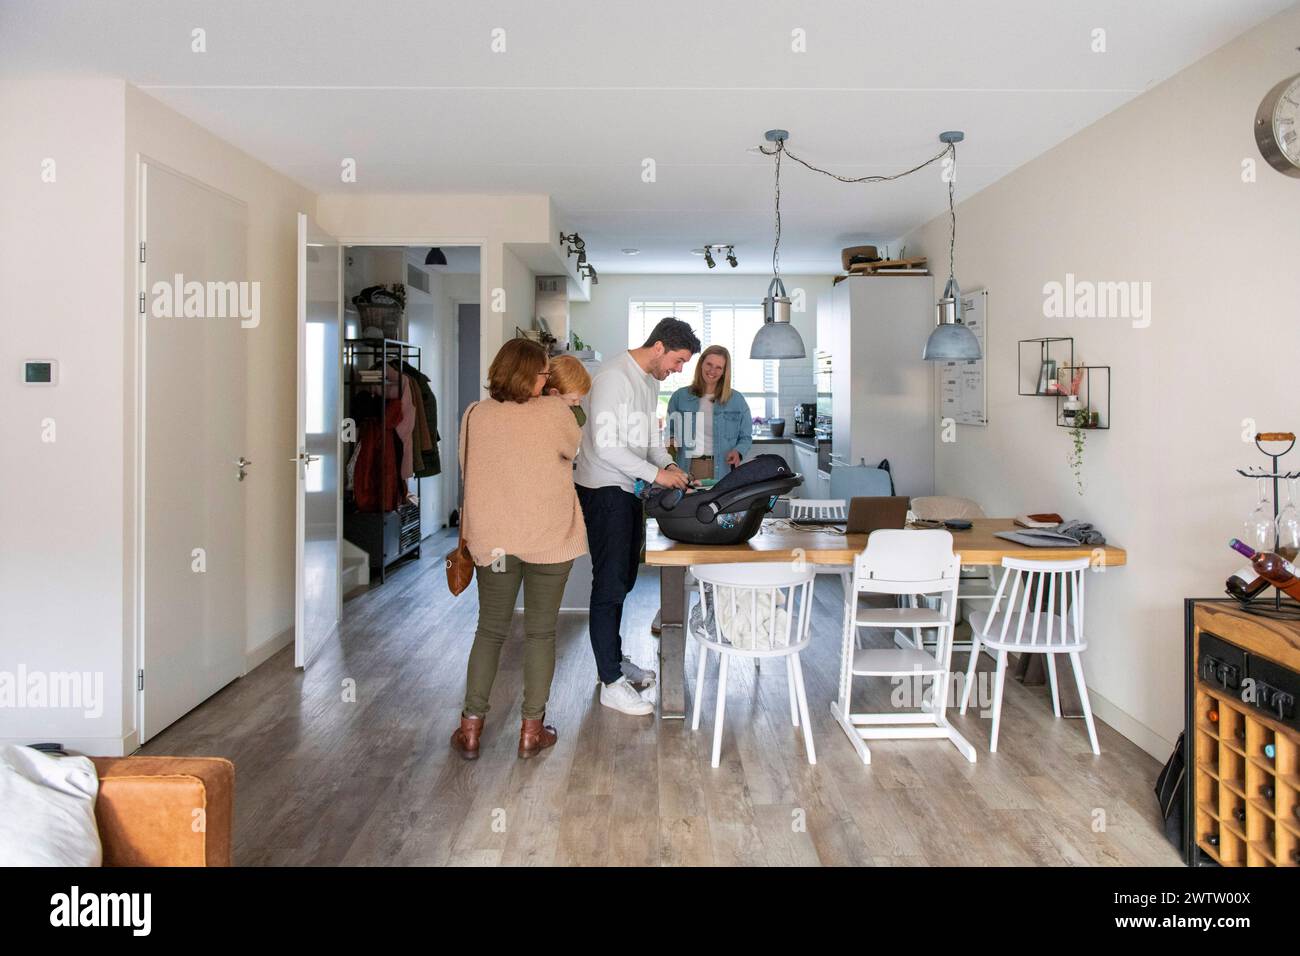 A cozy family moment in a modern home interior with natural light filtering in. Stock Photo